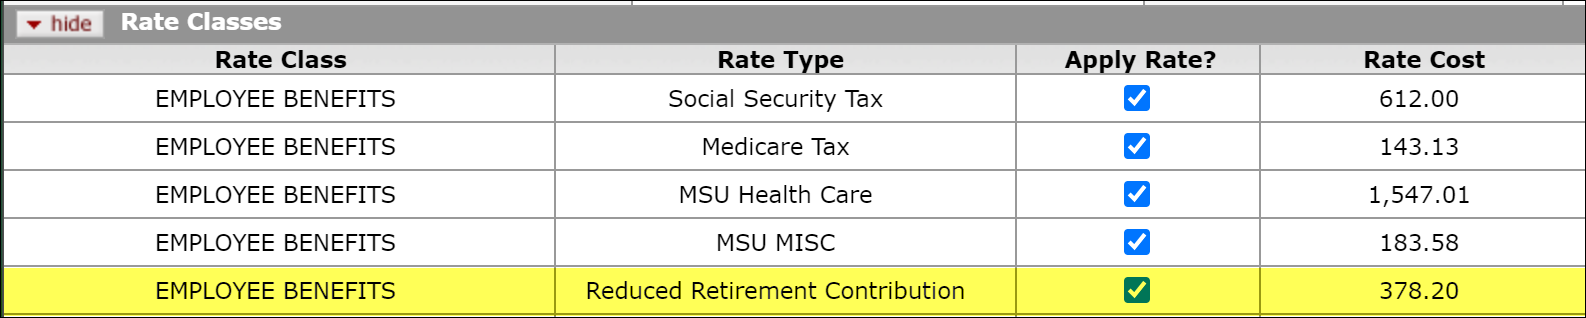 Rate Classes subpanel with the Reduced Retirement Contribution row highlighted